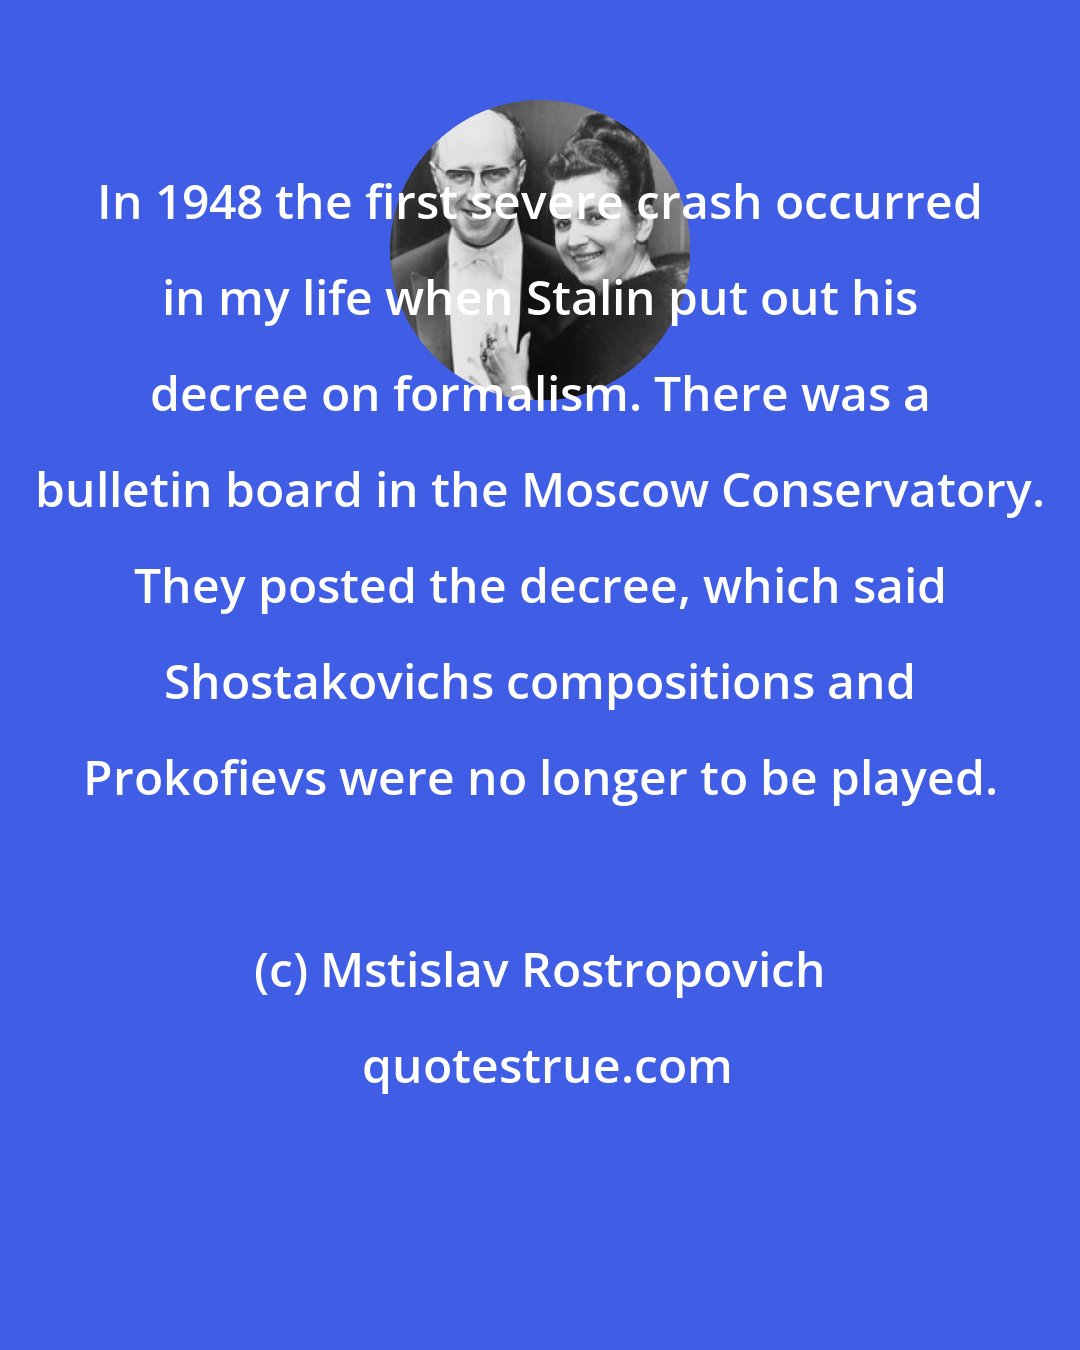 Mstislav Rostropovich: In 1948 the first severe crash occurred in my life when Stalin put out his decree on formalism. There was a bulletin board in the Moscow Conservatory. They posted the decree, which said Shostakovichs compositions and Prokofievs were no longer to be played.